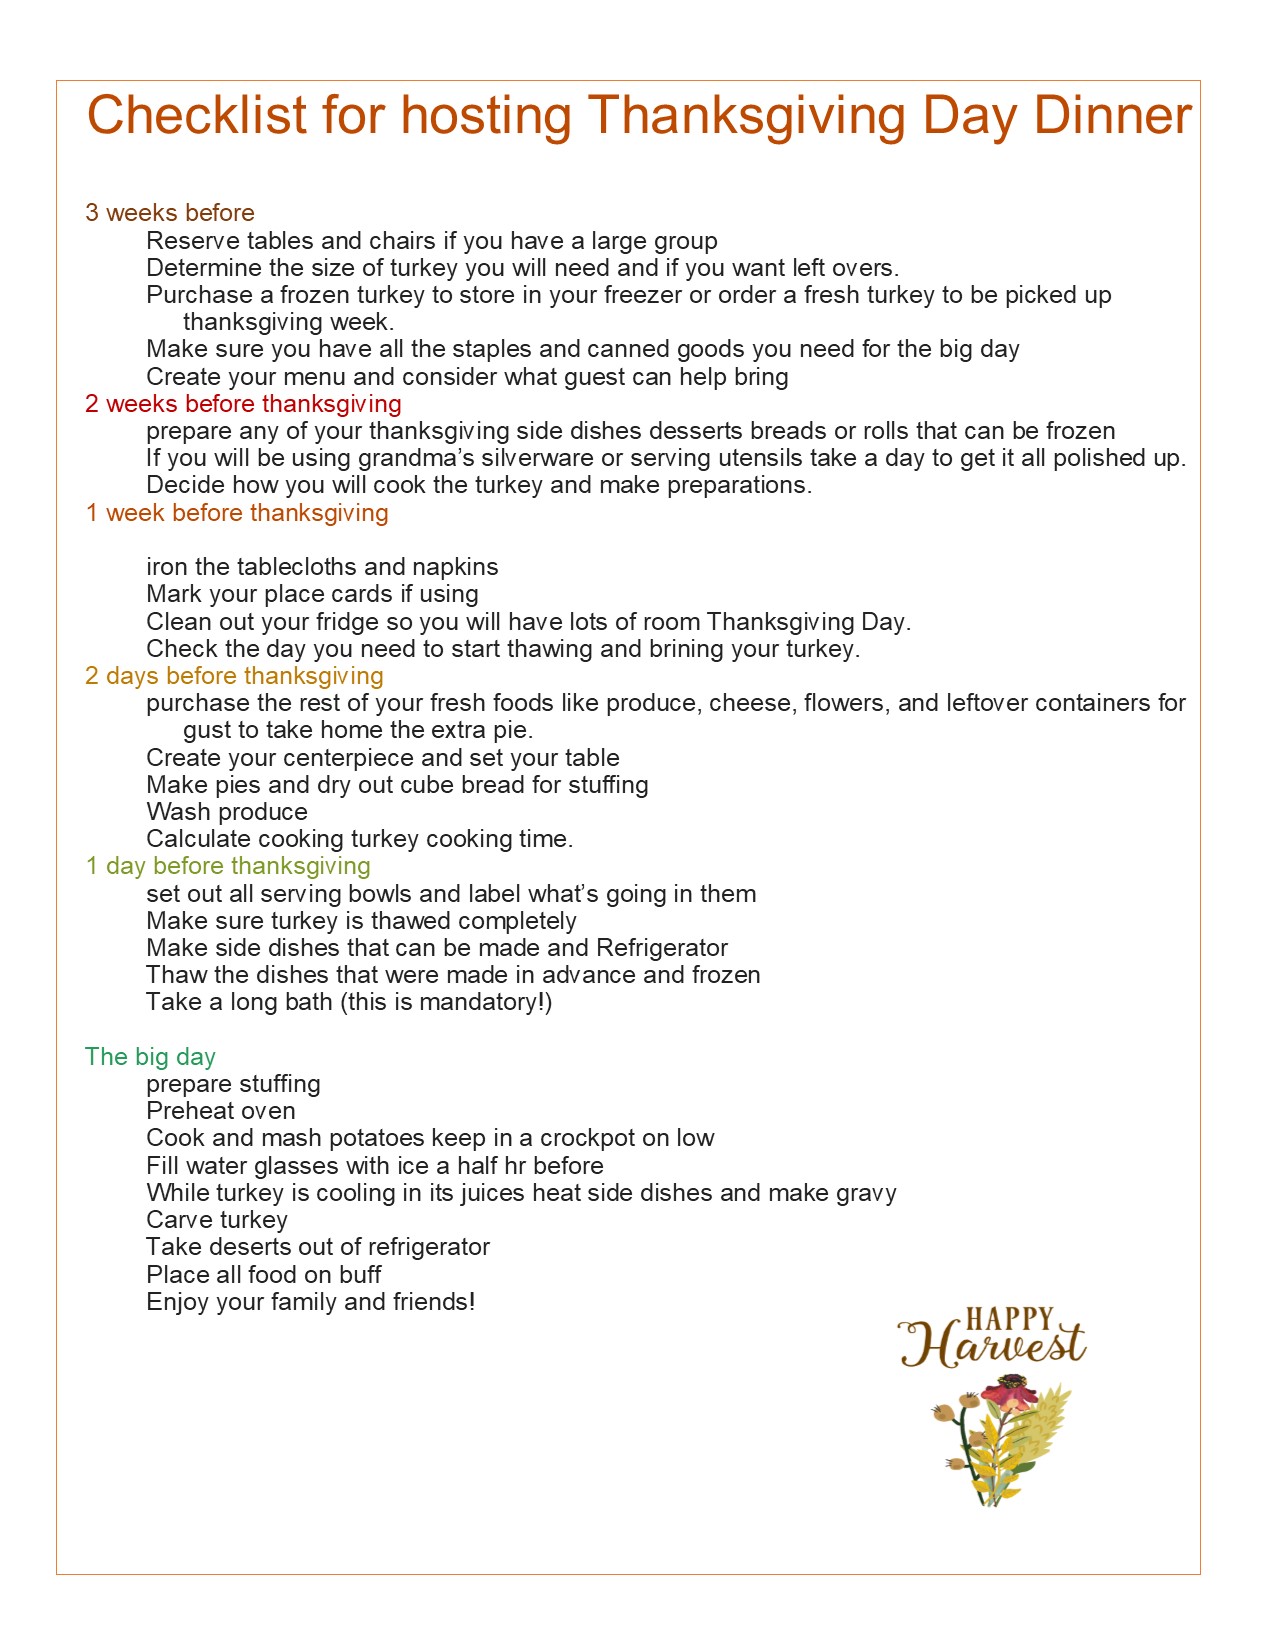 Thanksgiving day checklist, getting ready for thanksgiving, dinner checklist, free thanksgiving printable, free checklist for thanksgiving dinner